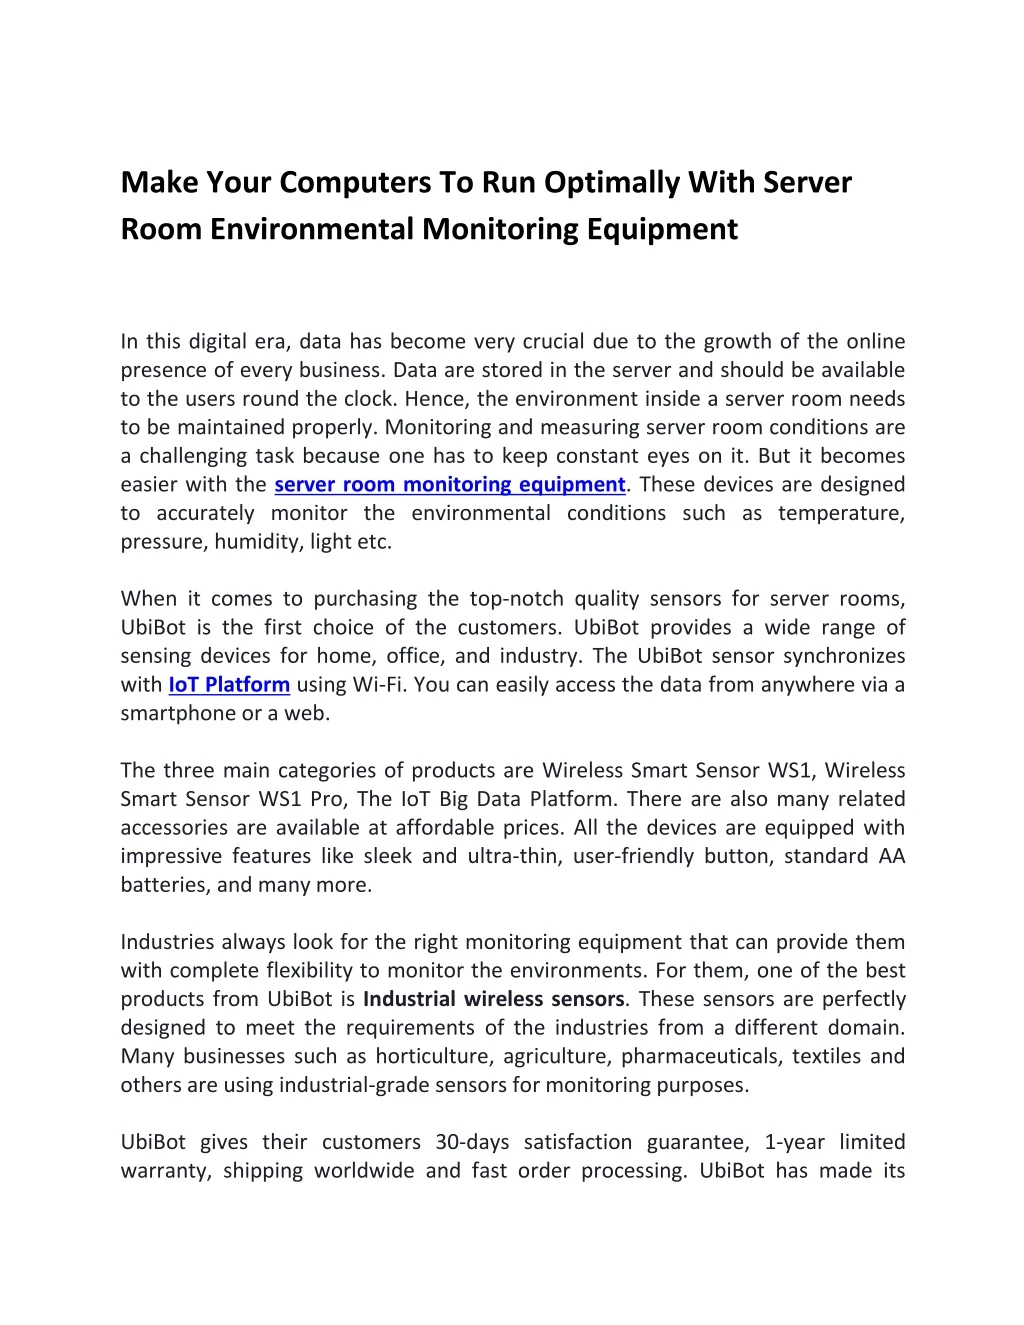 make your computers to run optimally with server